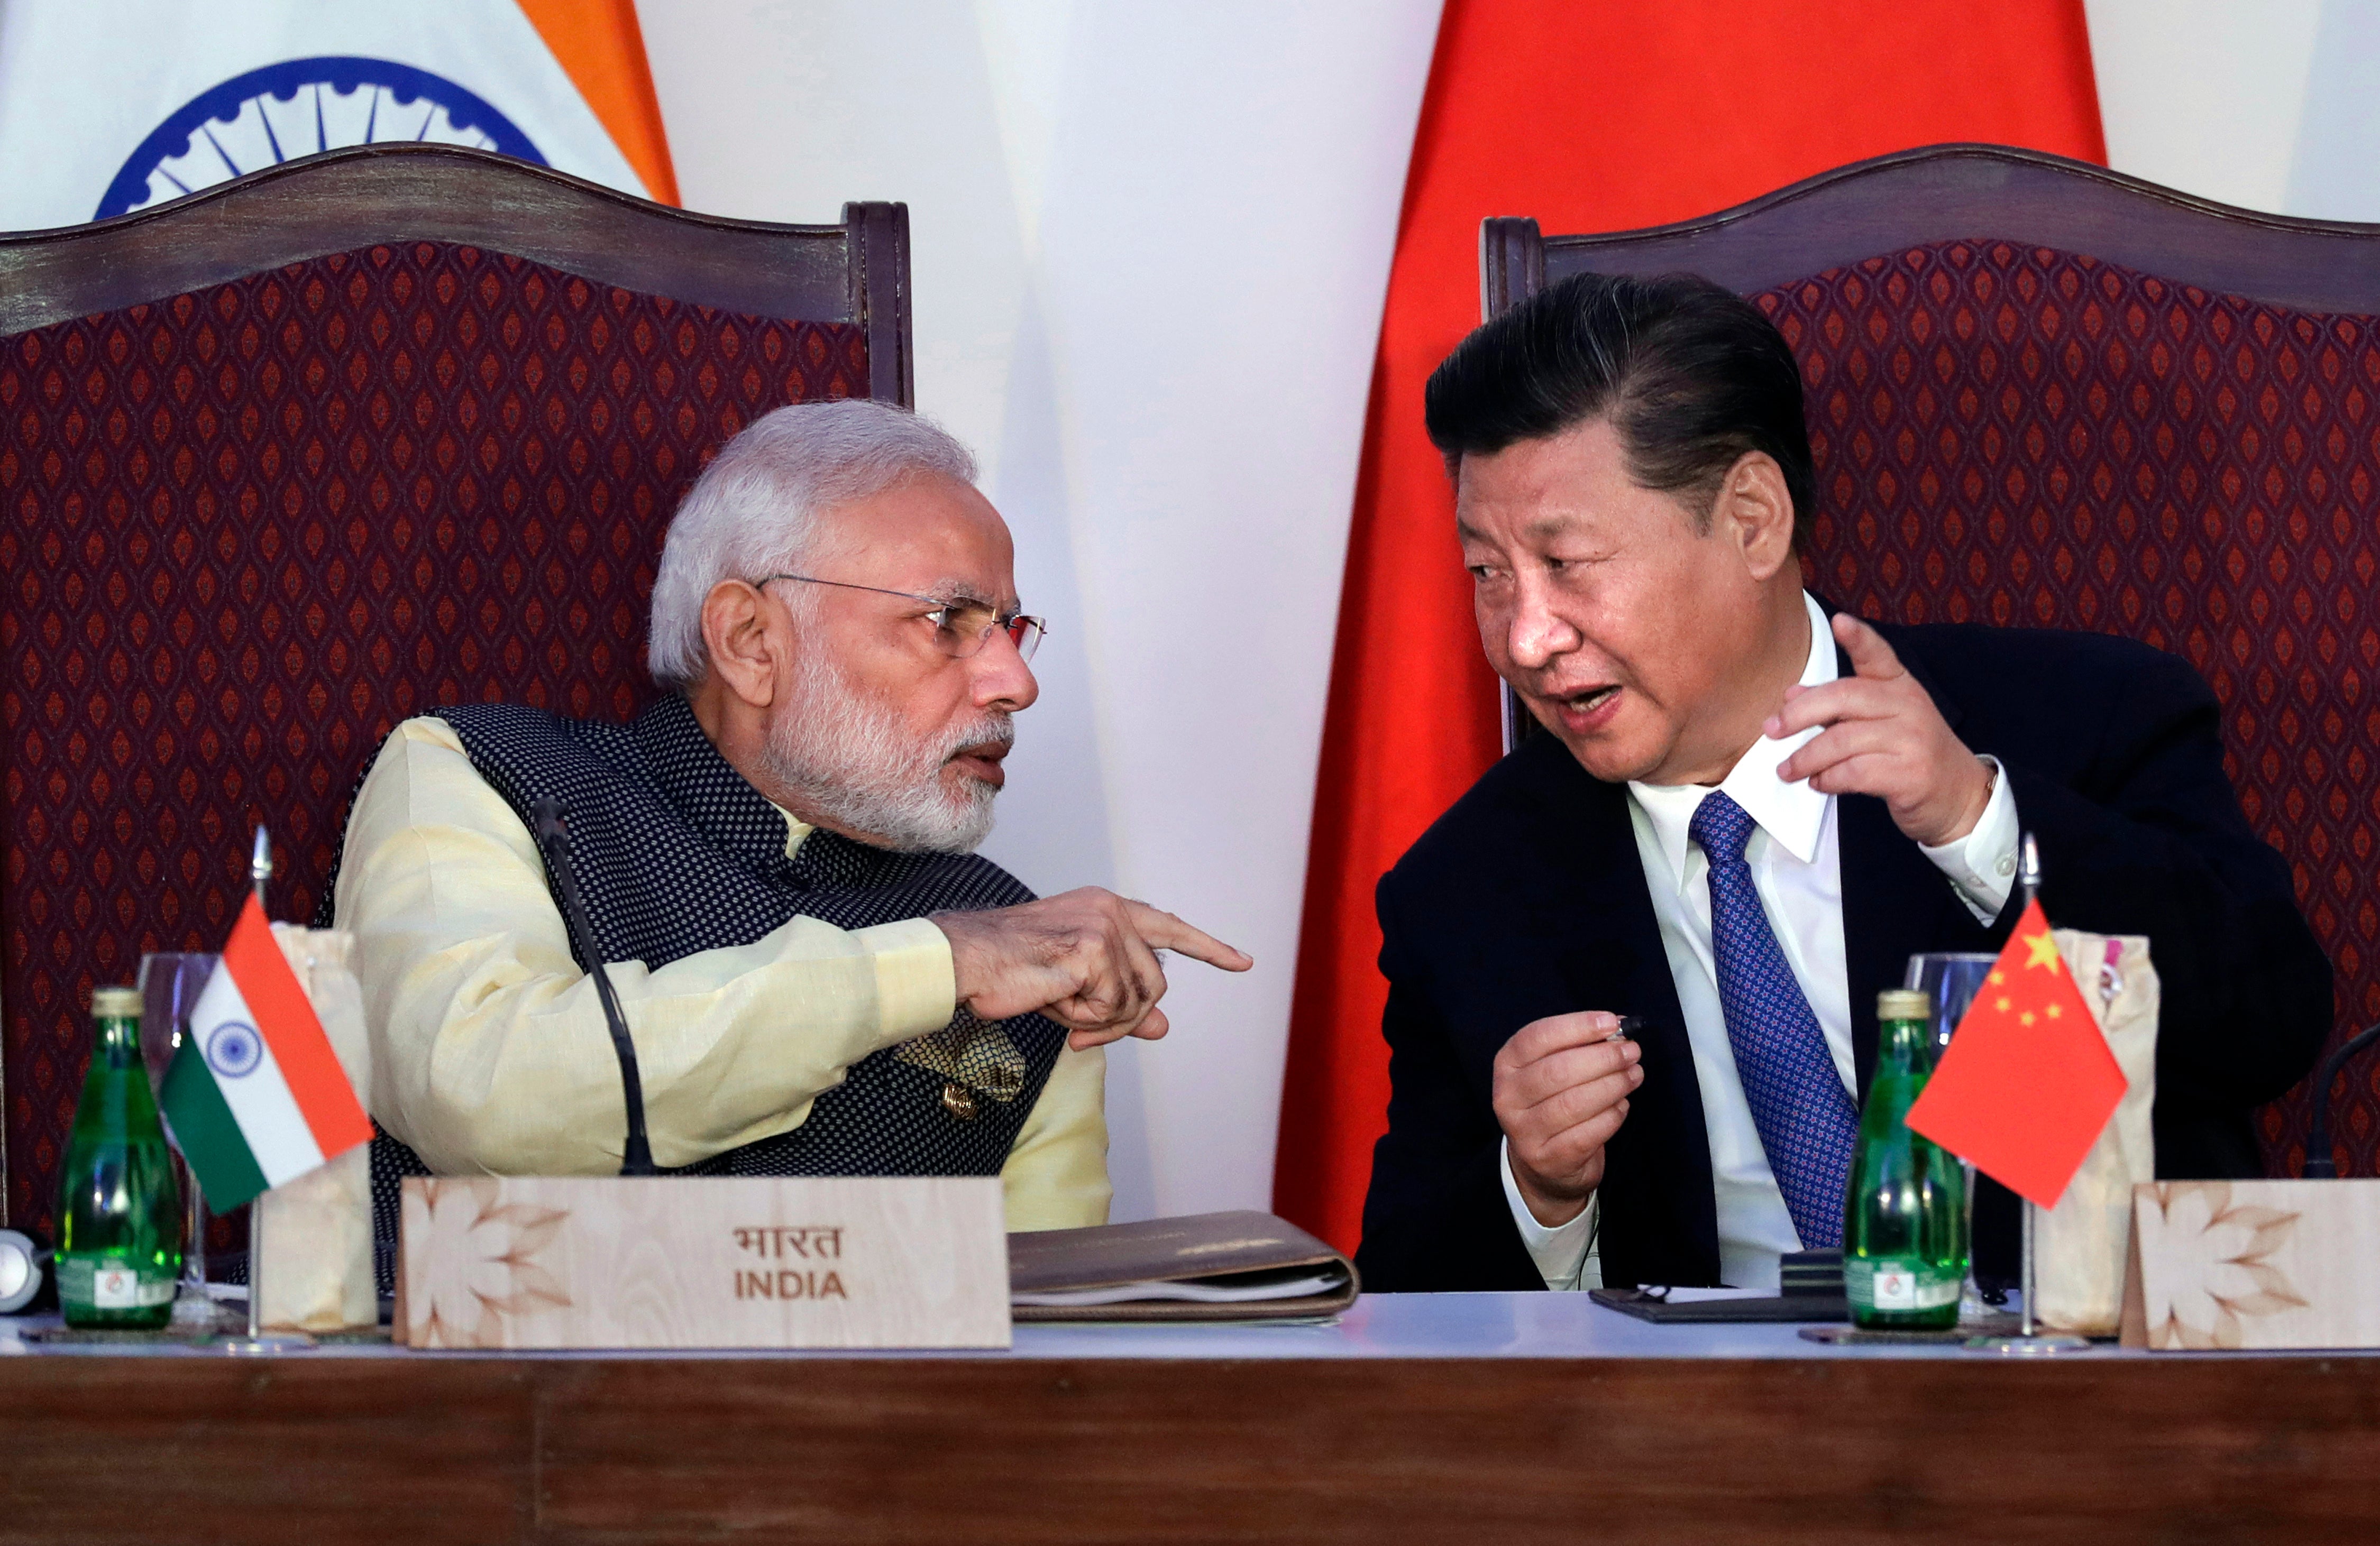 File: Indian prime minister Narendra Modi, left, talks with Chinese president Xi Jinping at a signing ceremony by foreign ministers during the BRICS summit in Goa, India, 16 October 2016